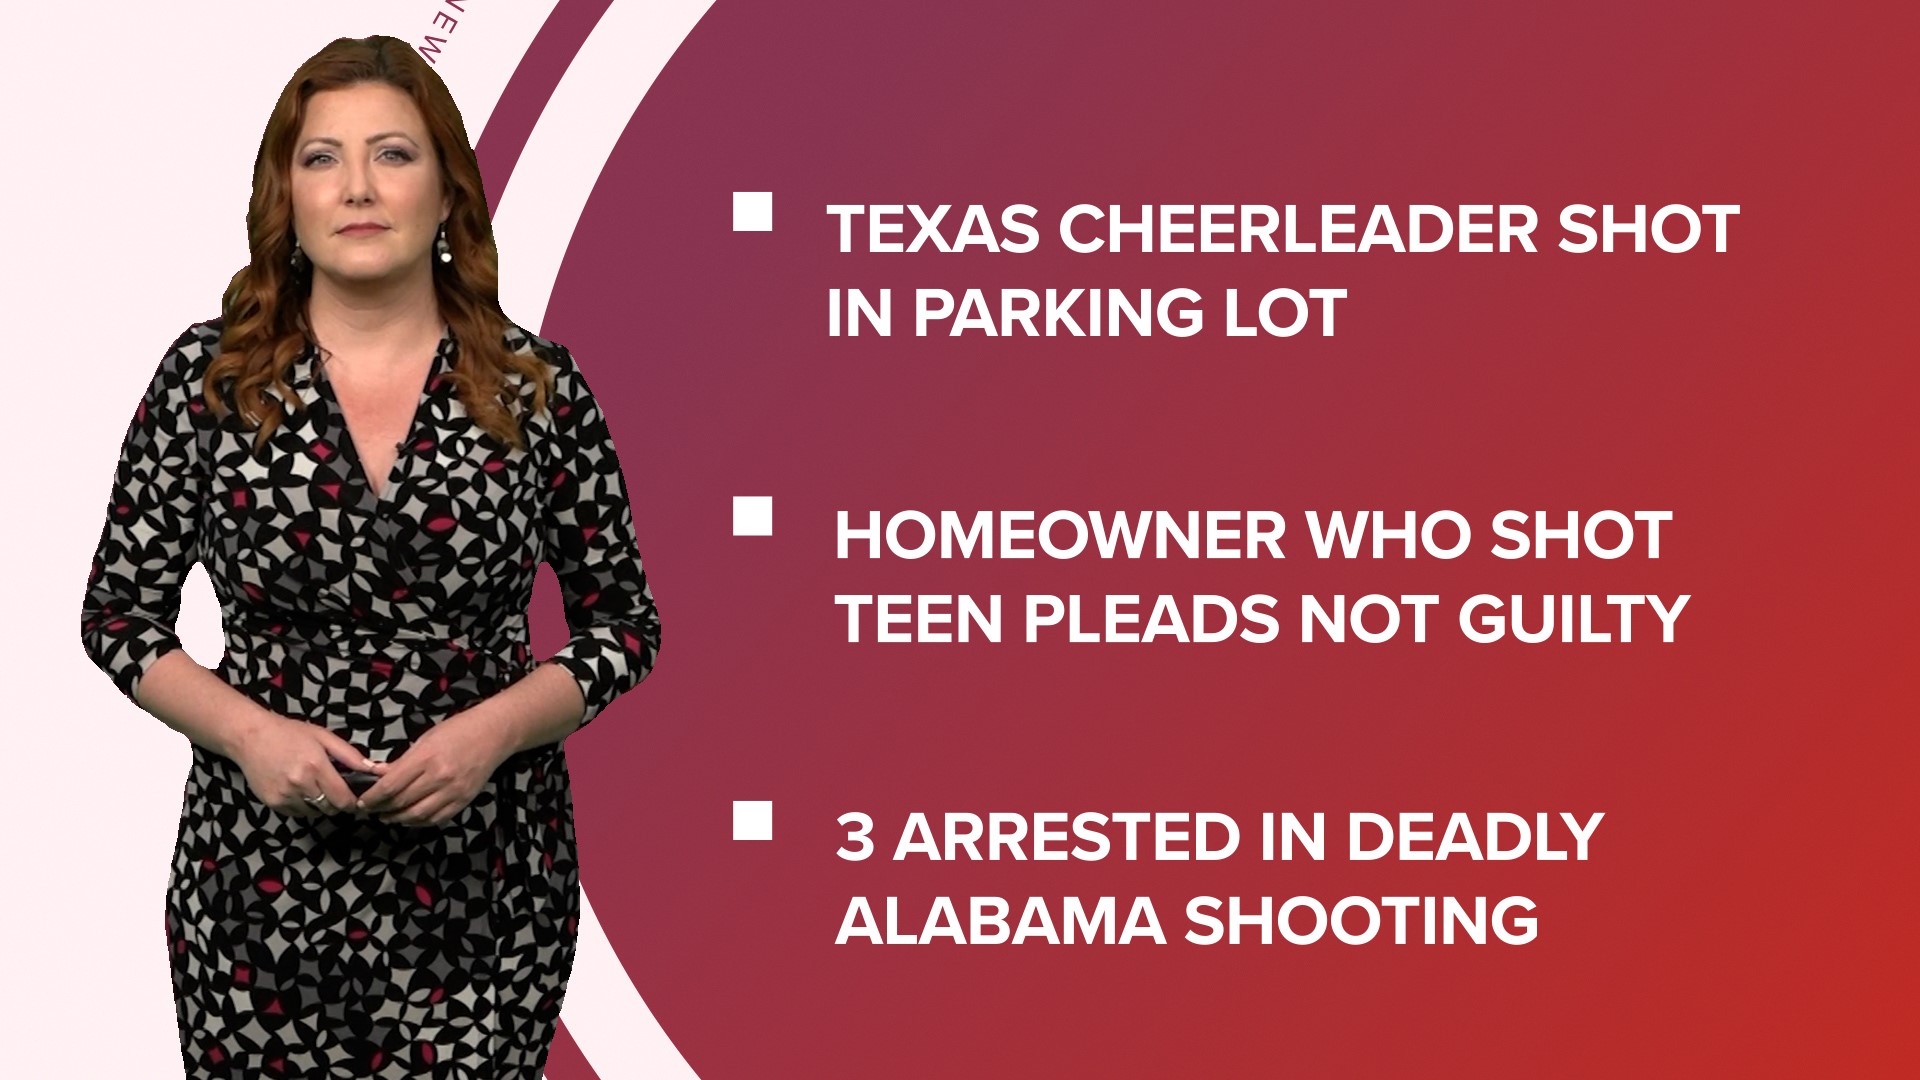 A look at what is happening in the news from a Texas cheerleader hospitalized after shooting to Facebook reaching a settlement that could benefit some users.